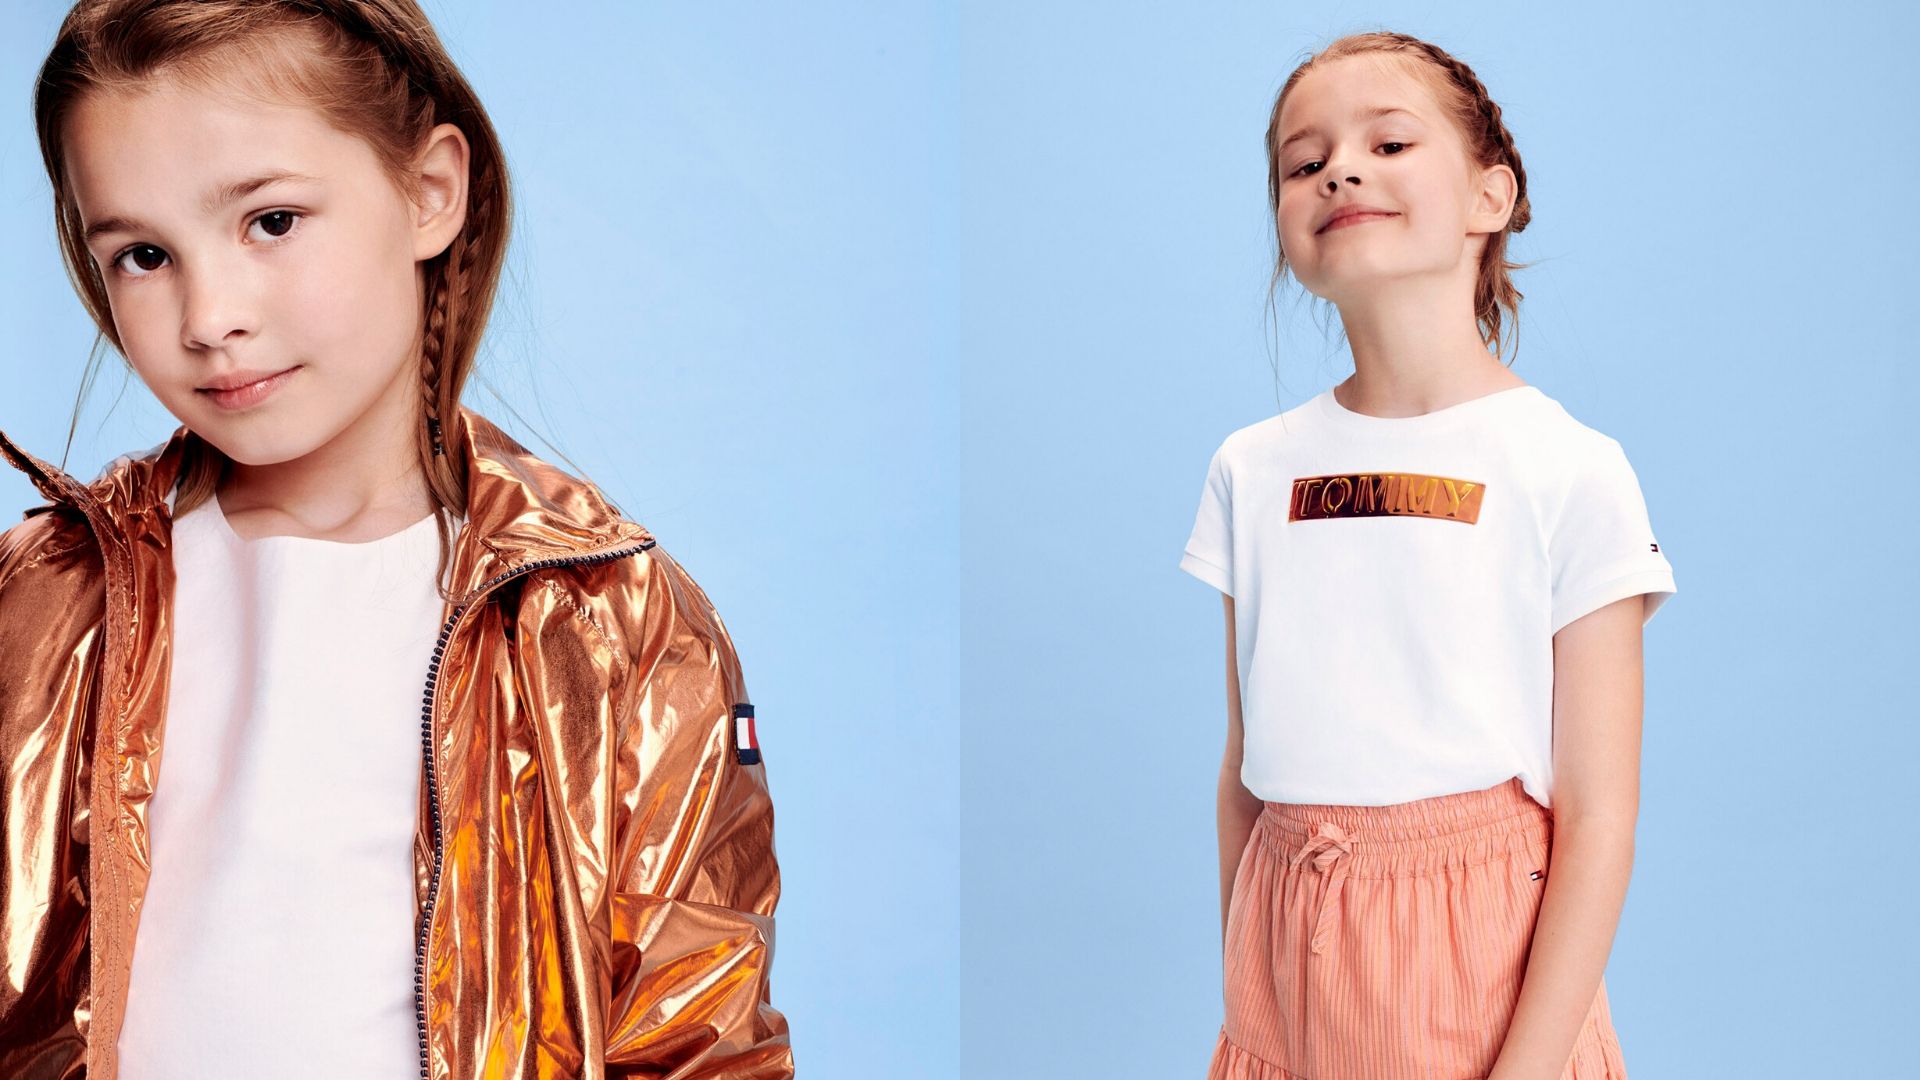 Tommy Hilfiger Has Launched The Coolest Kid's Collection For 2020 Harper's Arabia